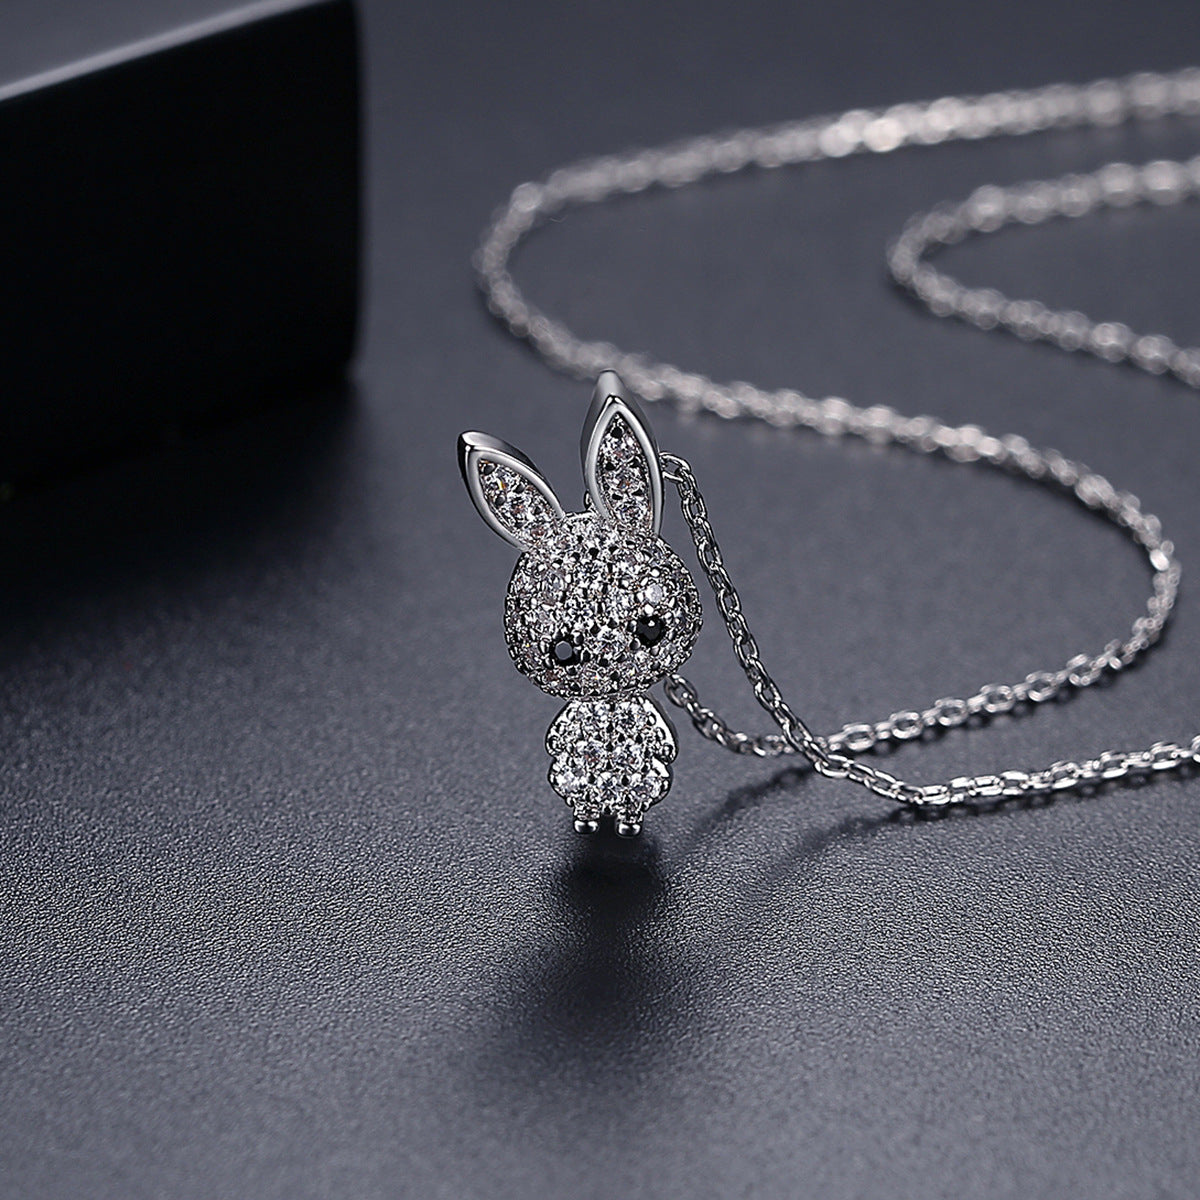 Cubic Zirconia & Silver-Plated Rabbit Pendant Necklace